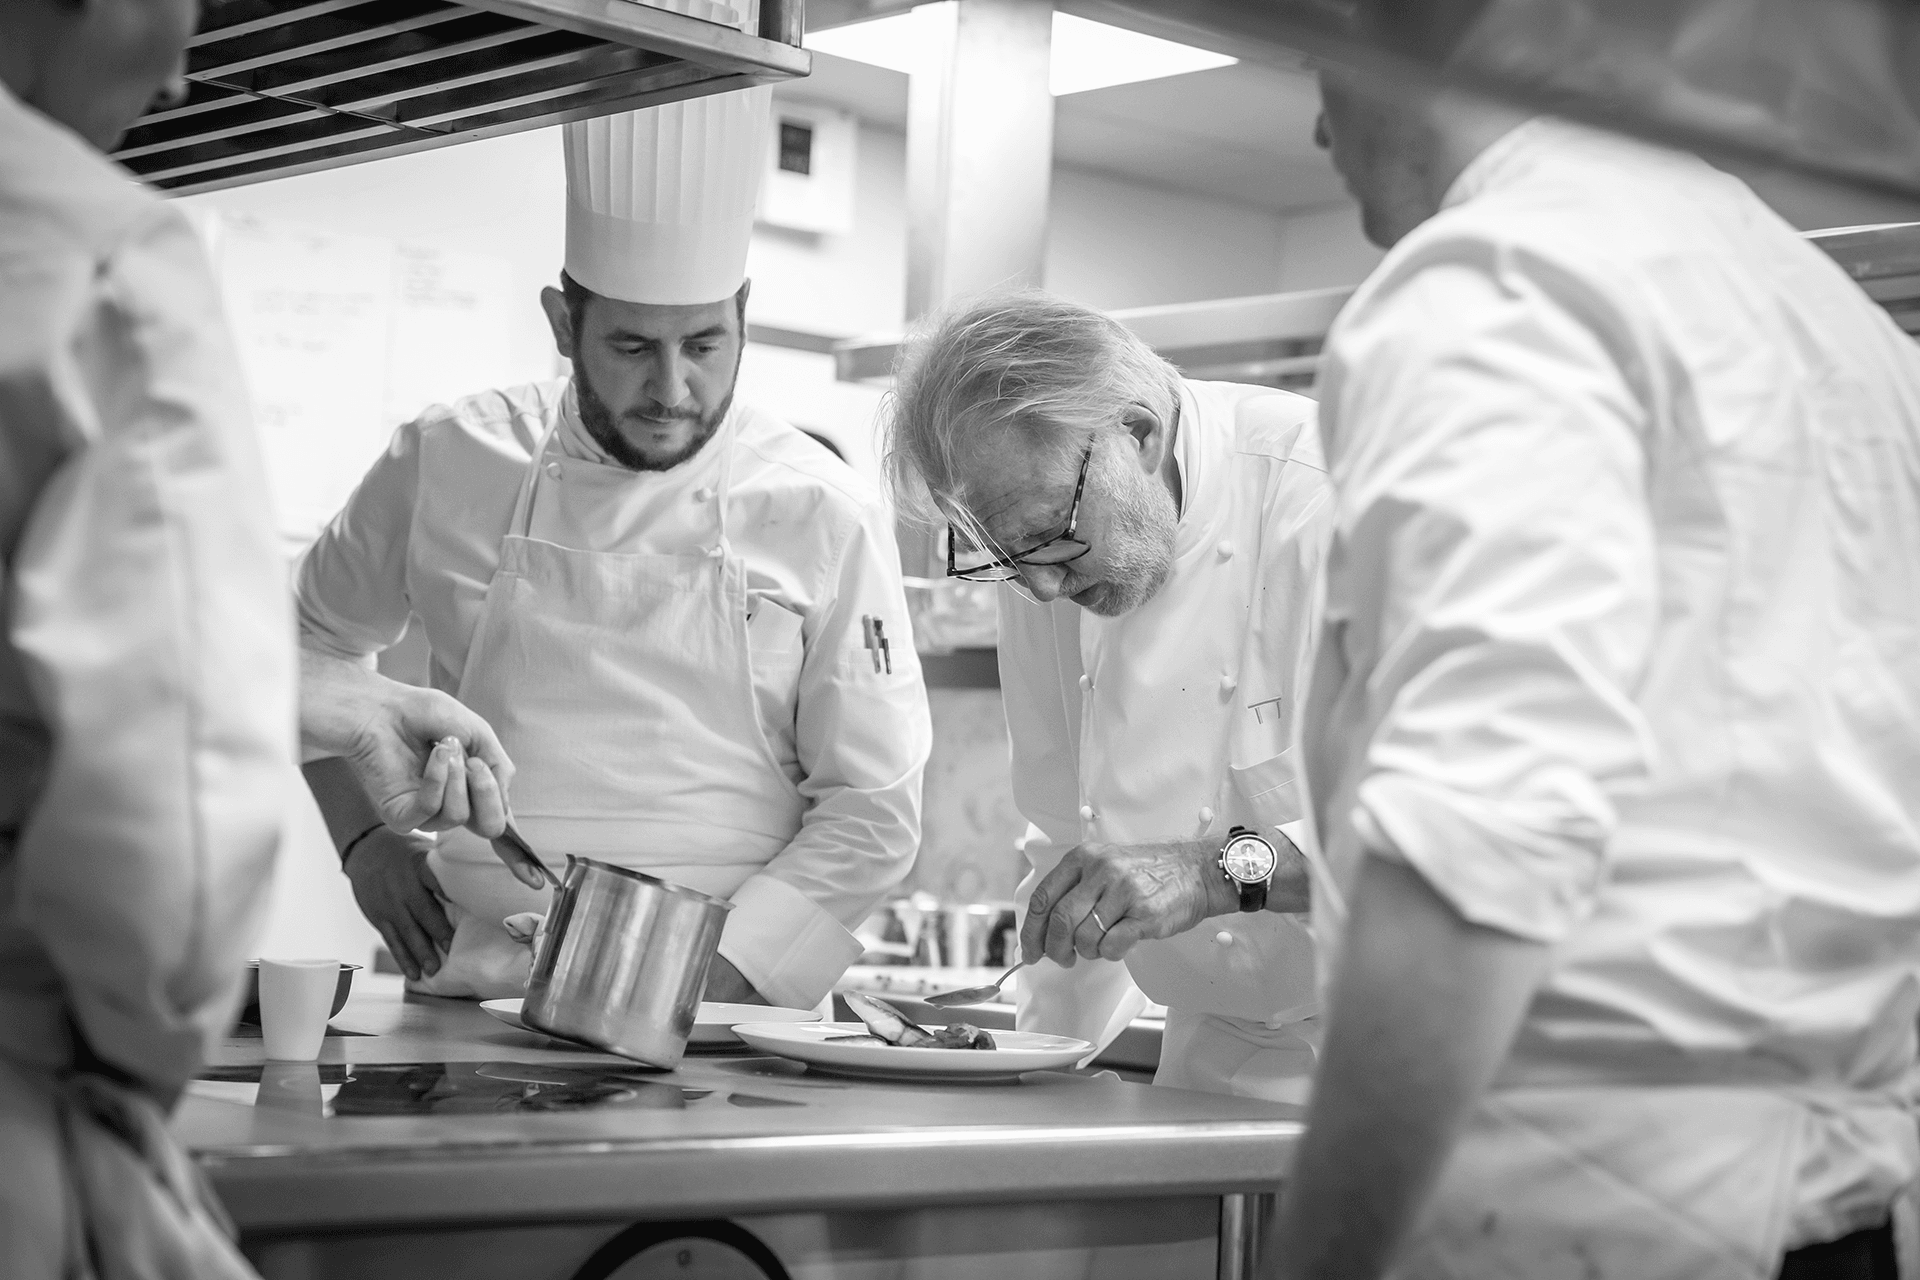 Maison Albar Hotels L'Imperator, starred chef Pierre Gagnaire